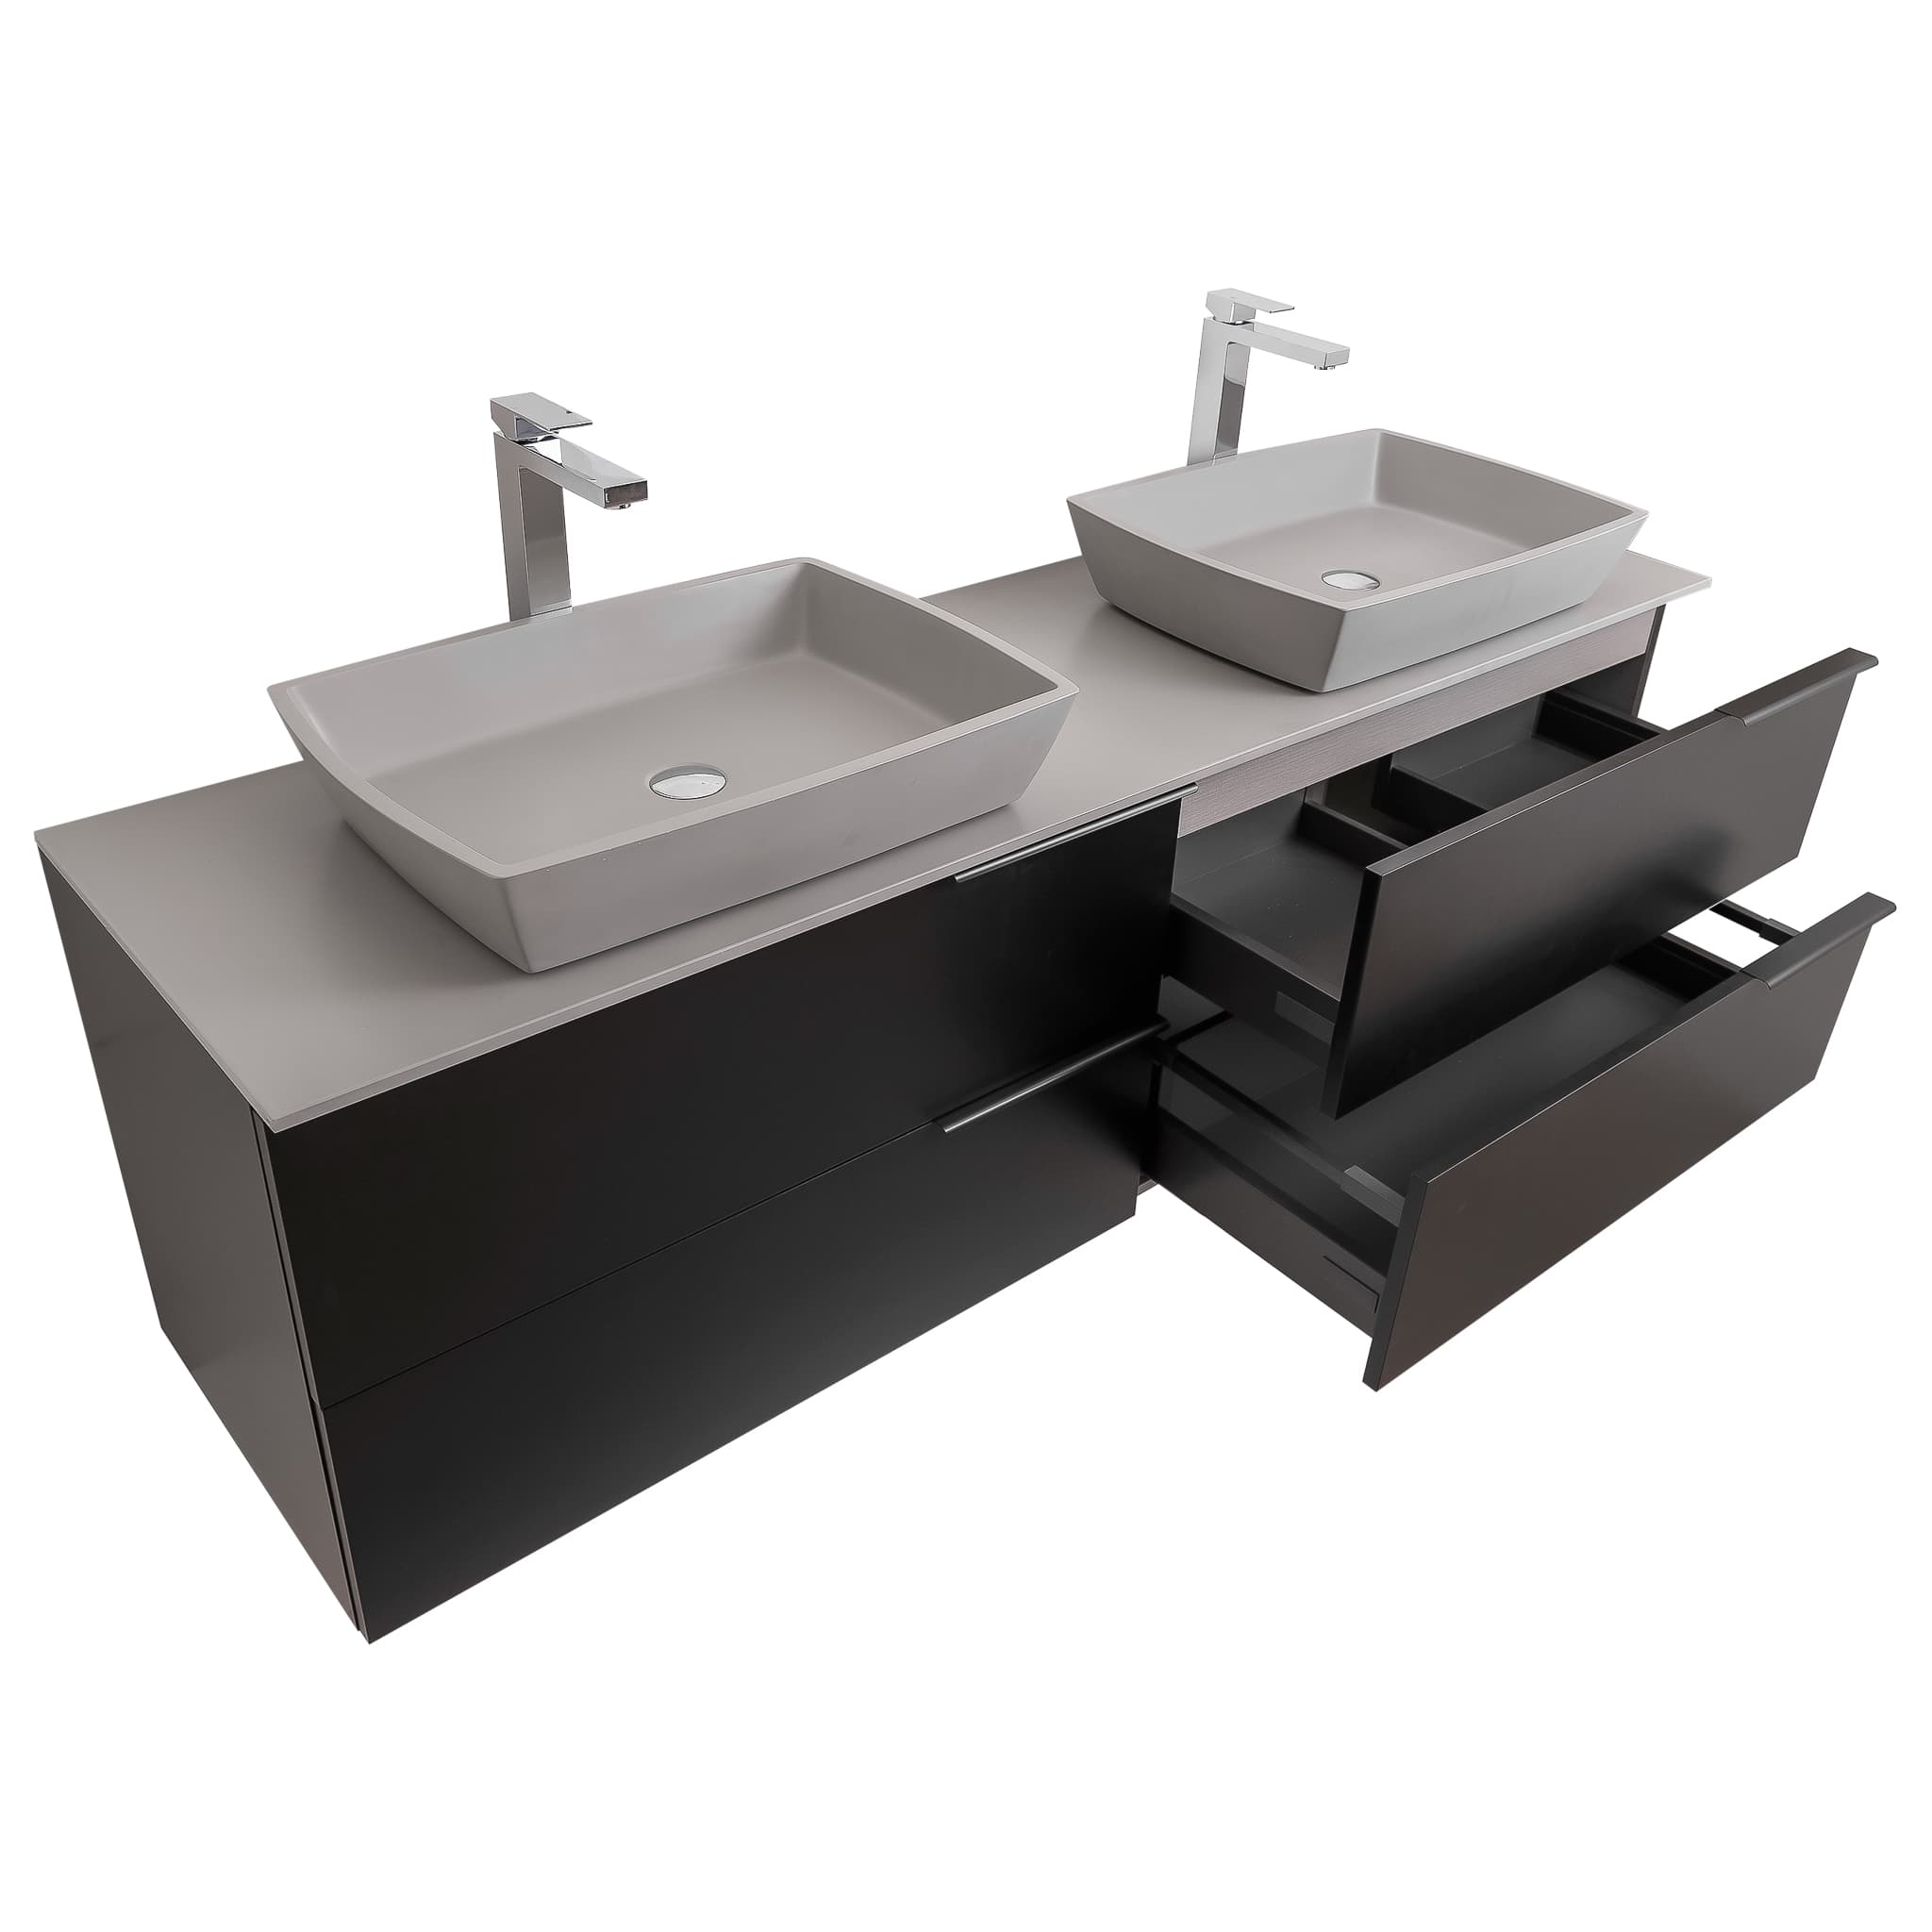 Mallorca 72 Matte Black Cabinet, Solid Surface Flat Grey Counter And Two Square Solid Surface Grey Basin 1316, Wall Mounted Modern Vanity Set